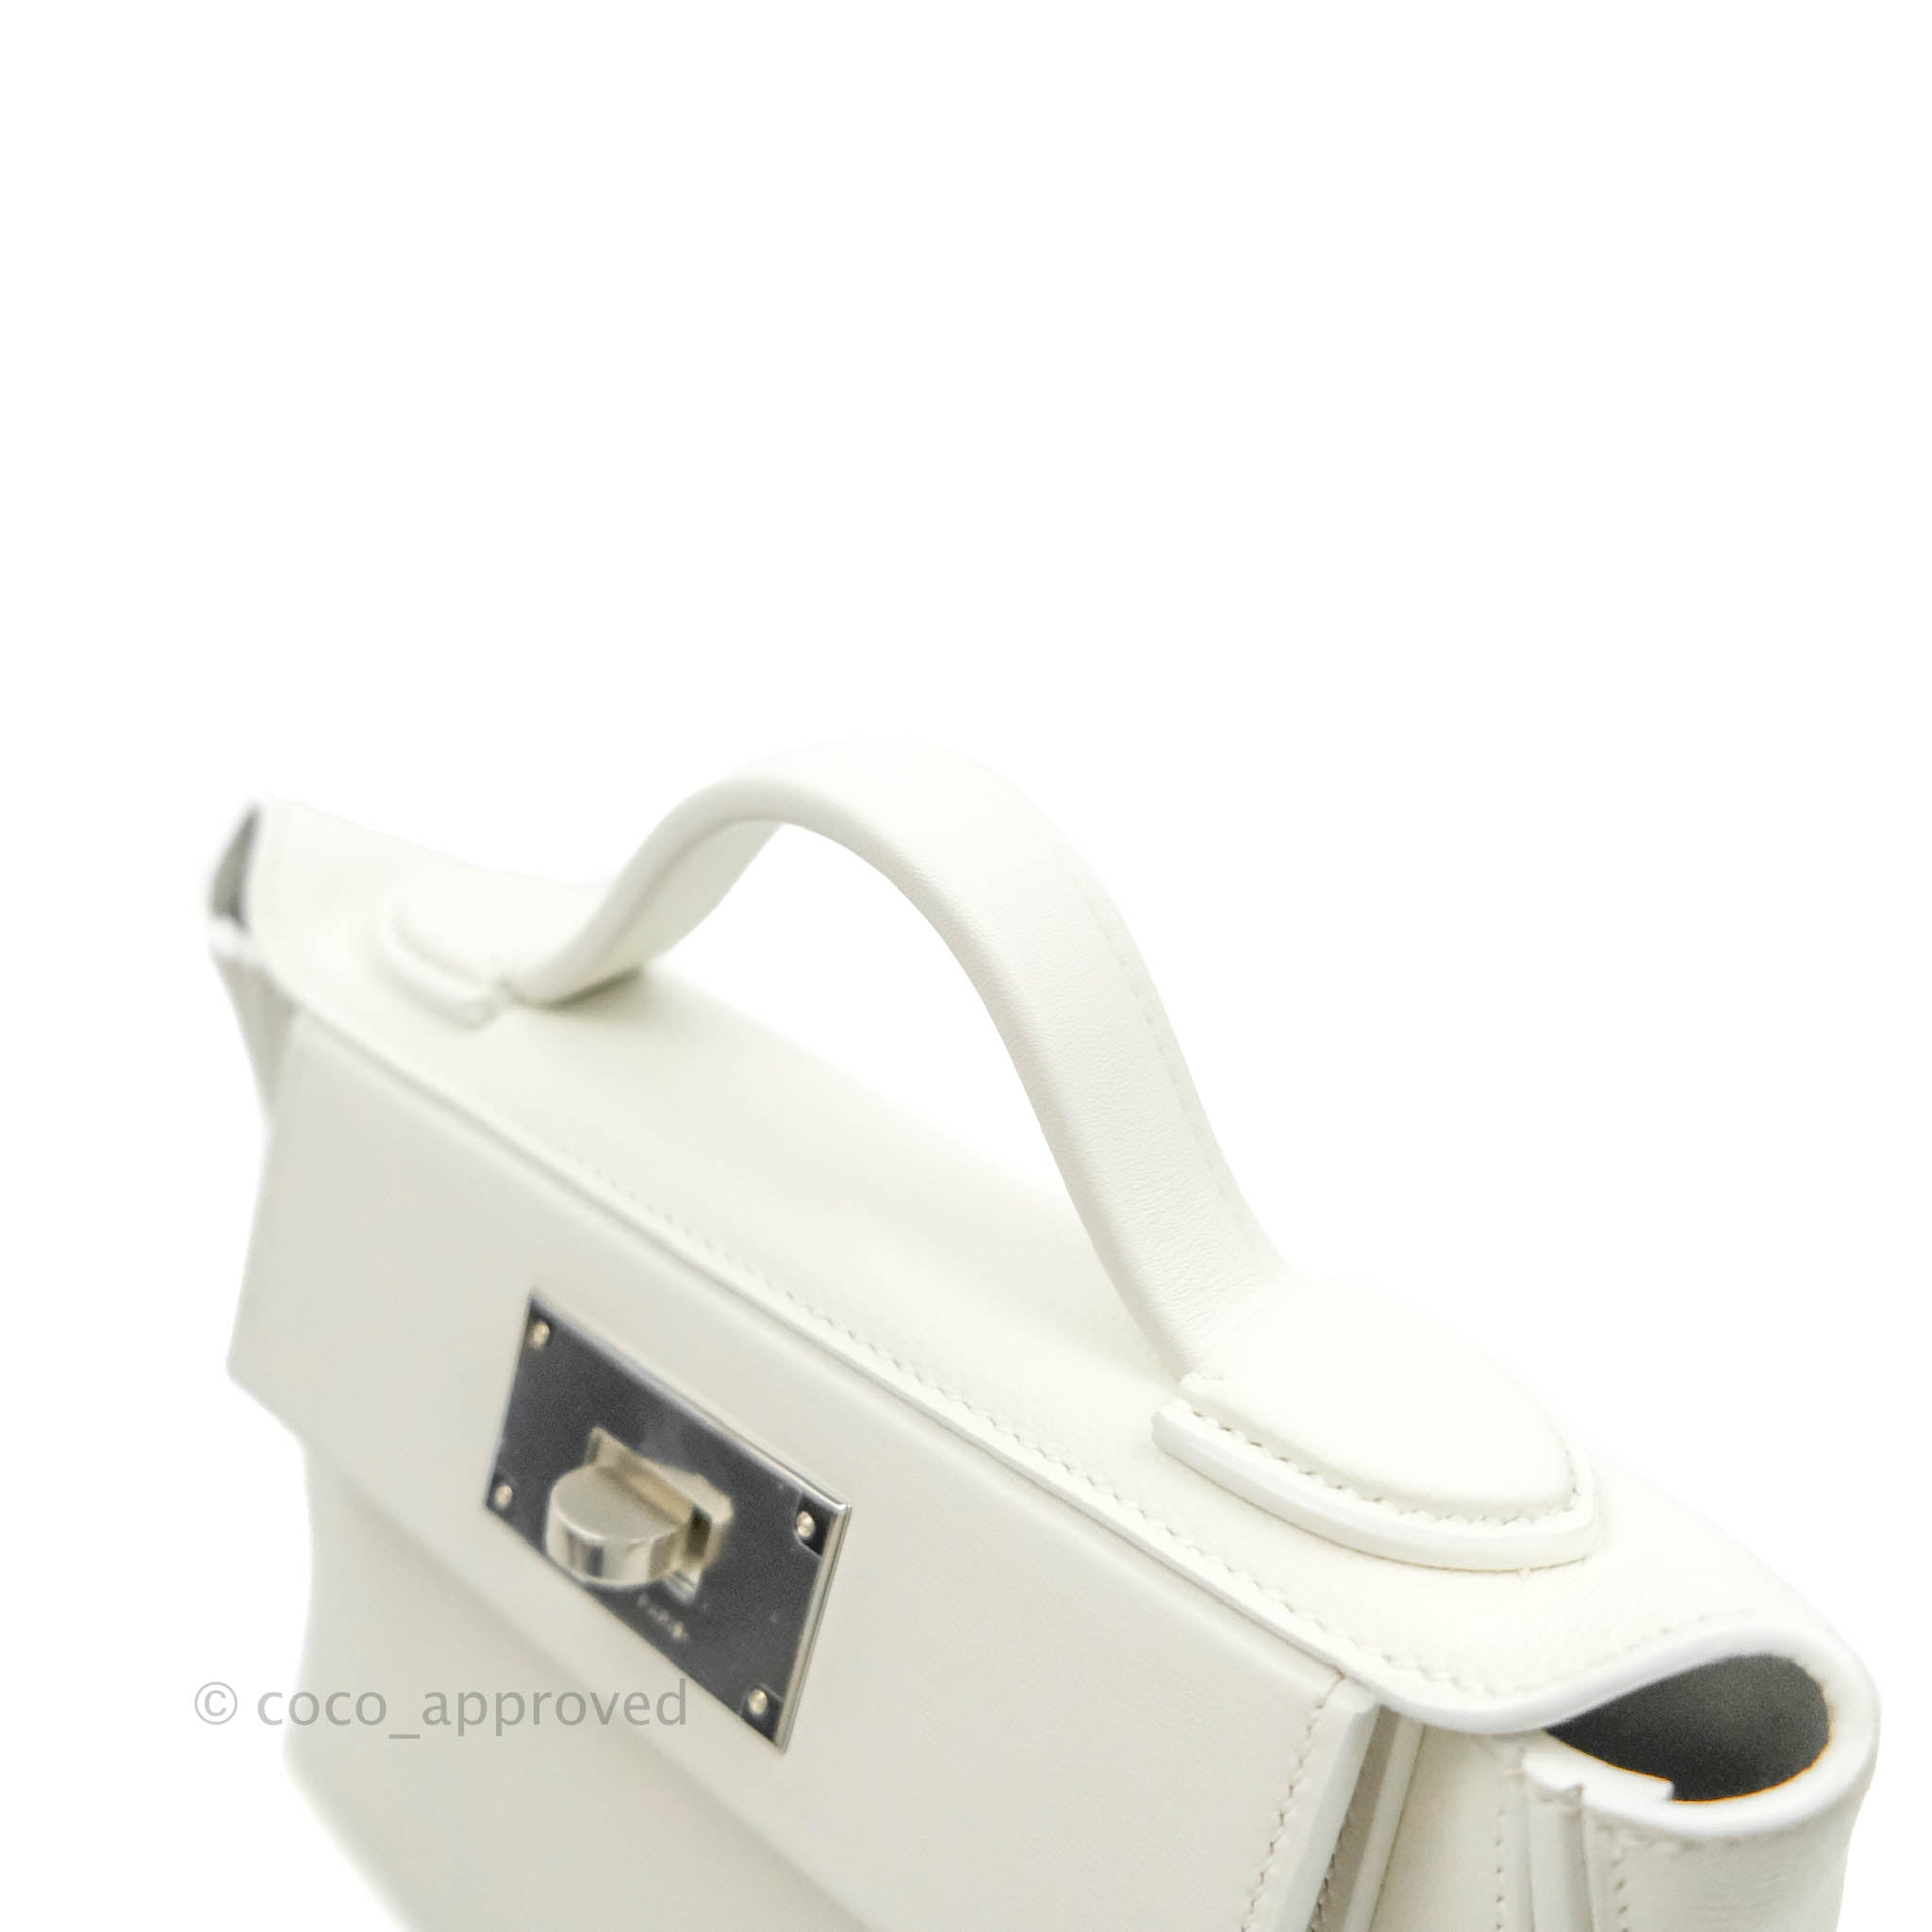 Hermès 24/24 21 White Evercolor And Nata Swift With Gold Hardware